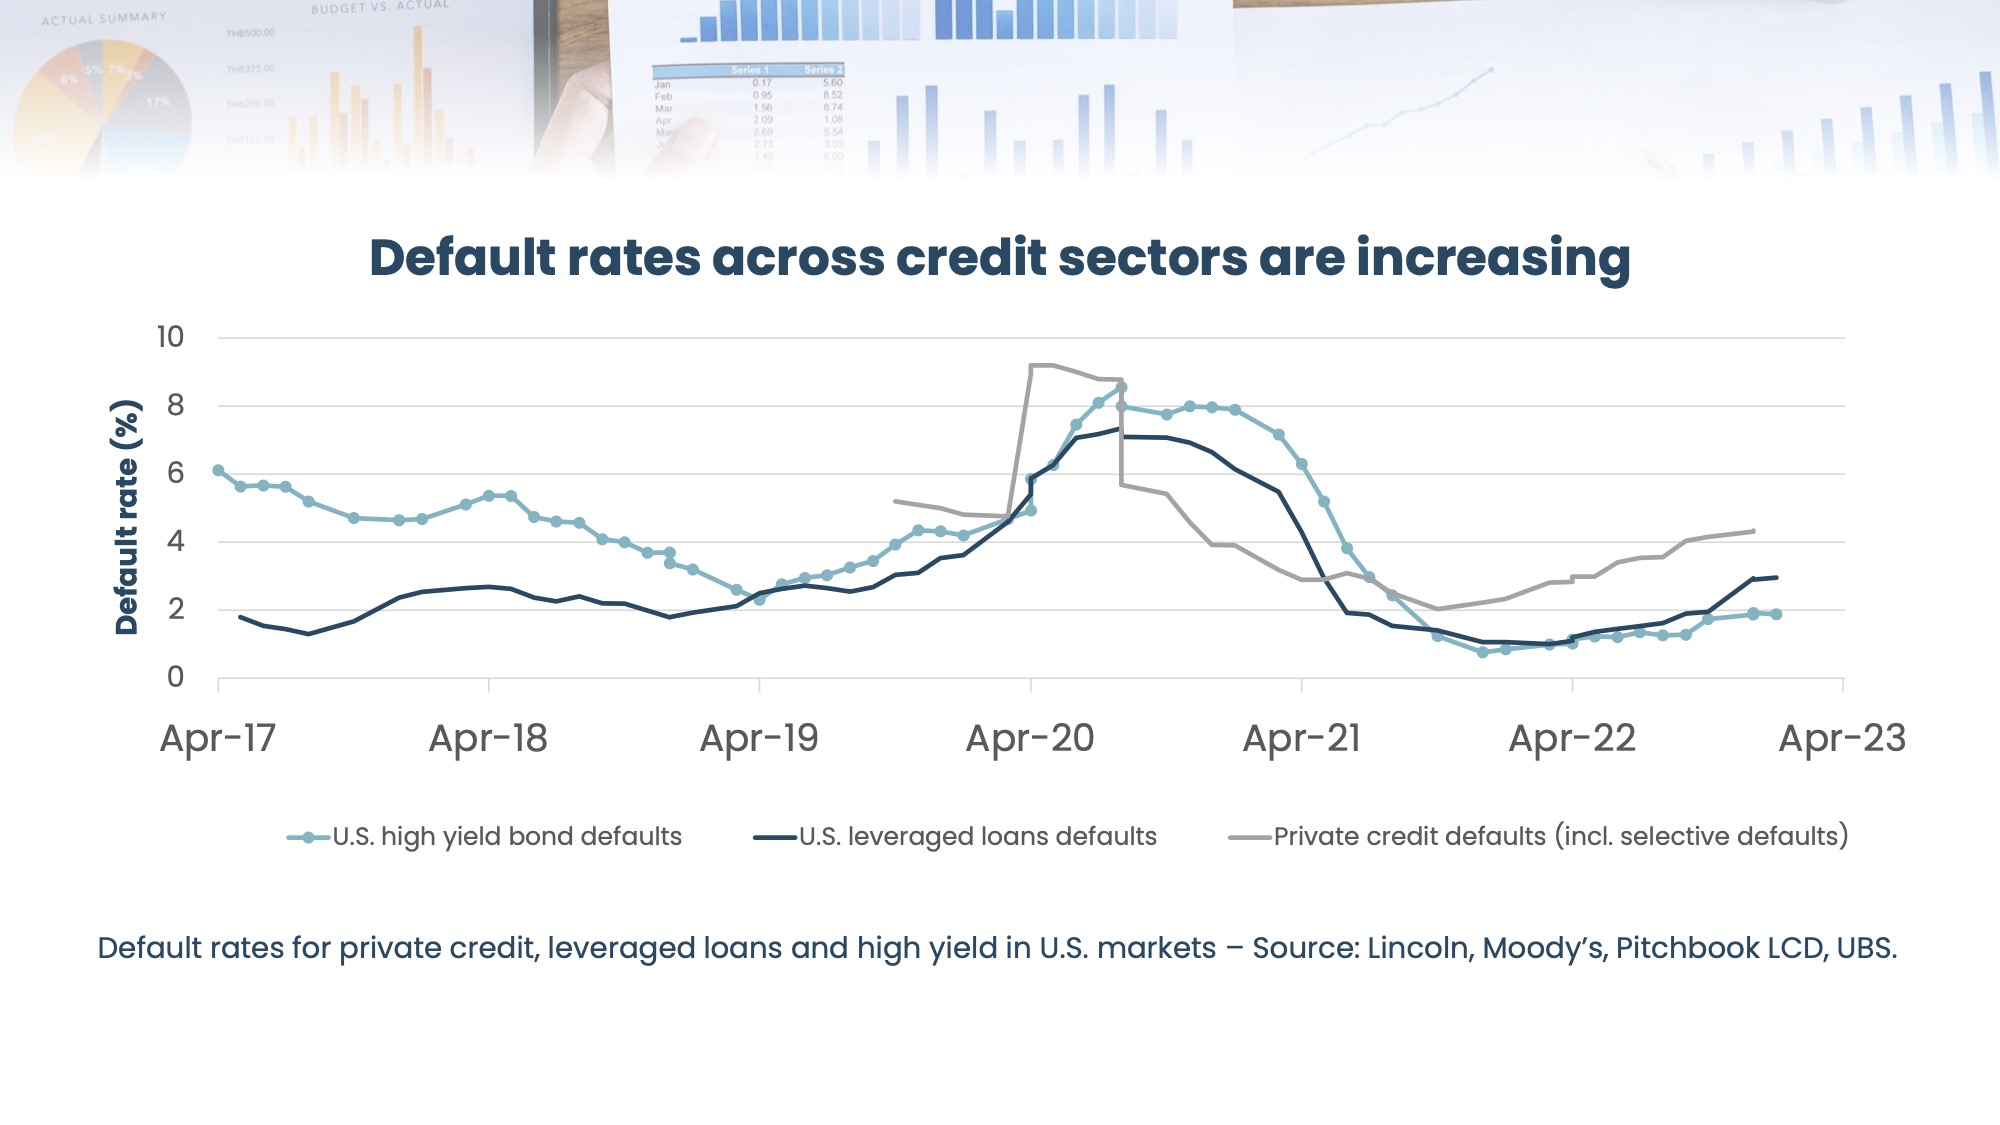 Default rates across credit sectors are increasing